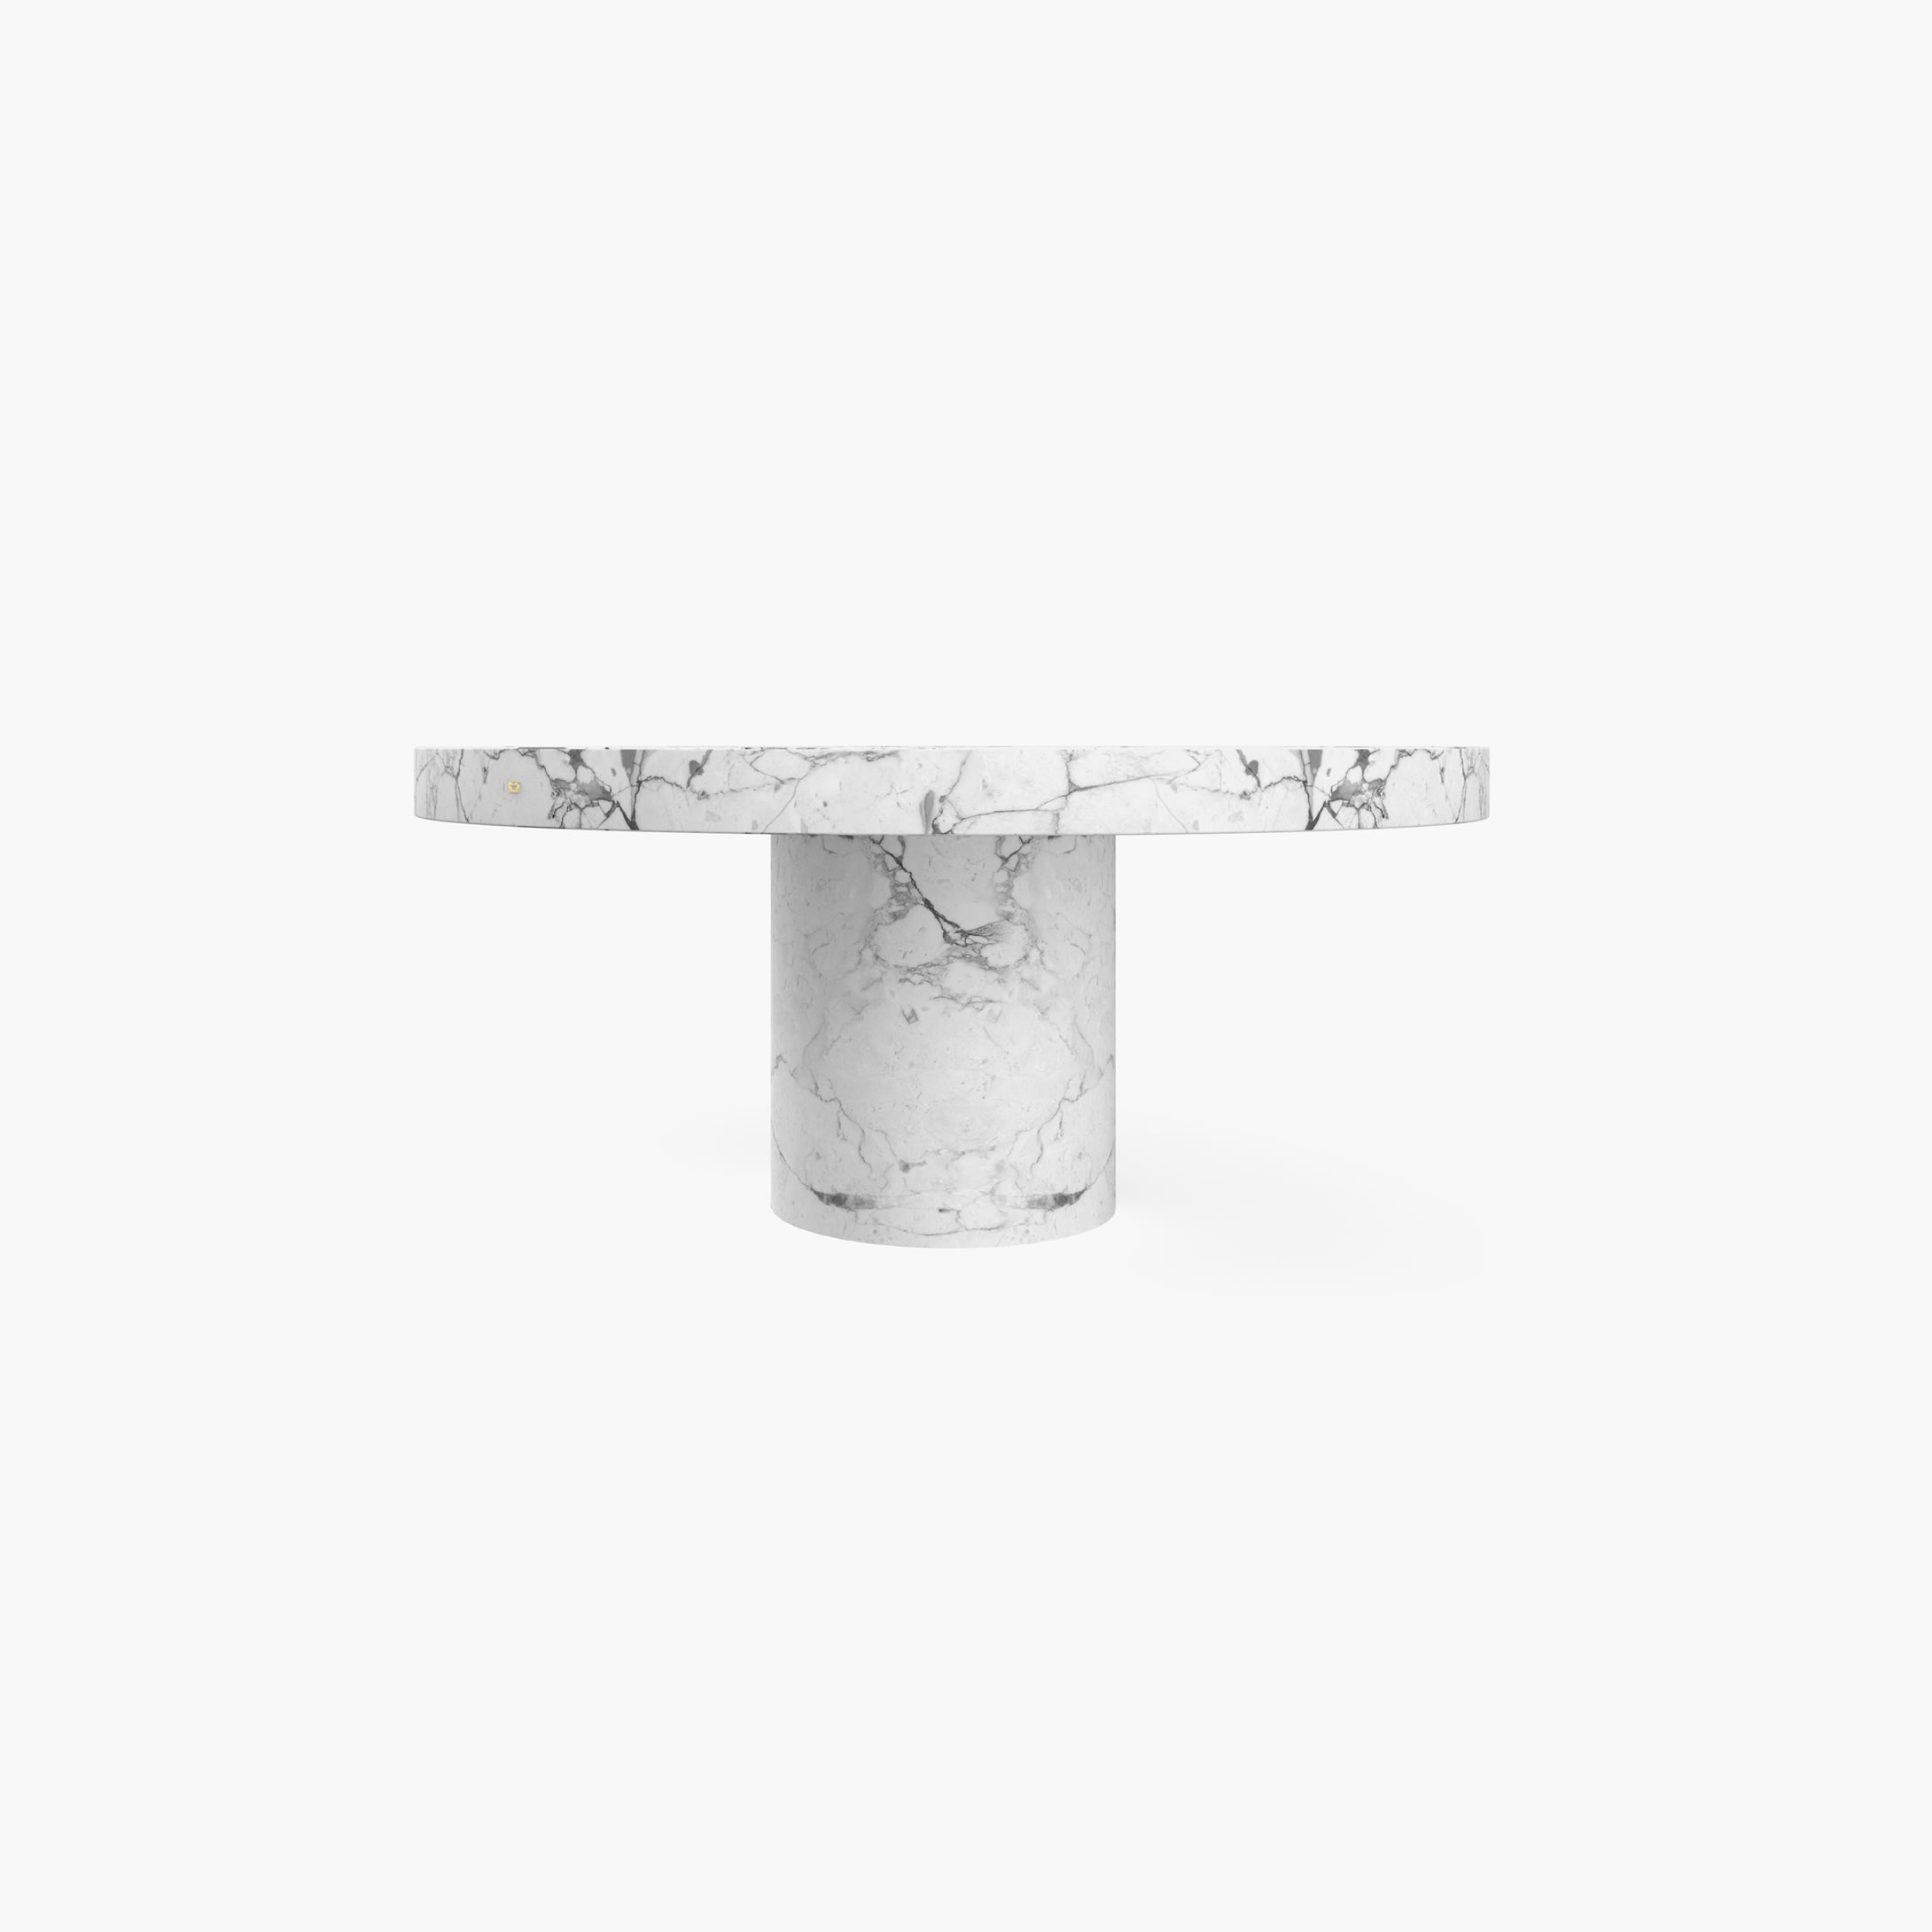 Dining Table round cylindrically perforated cuboid leg White Arabescato Marble limited edition Dining Room creation Dining Tables FS 194 B FELIX SCHWAKE